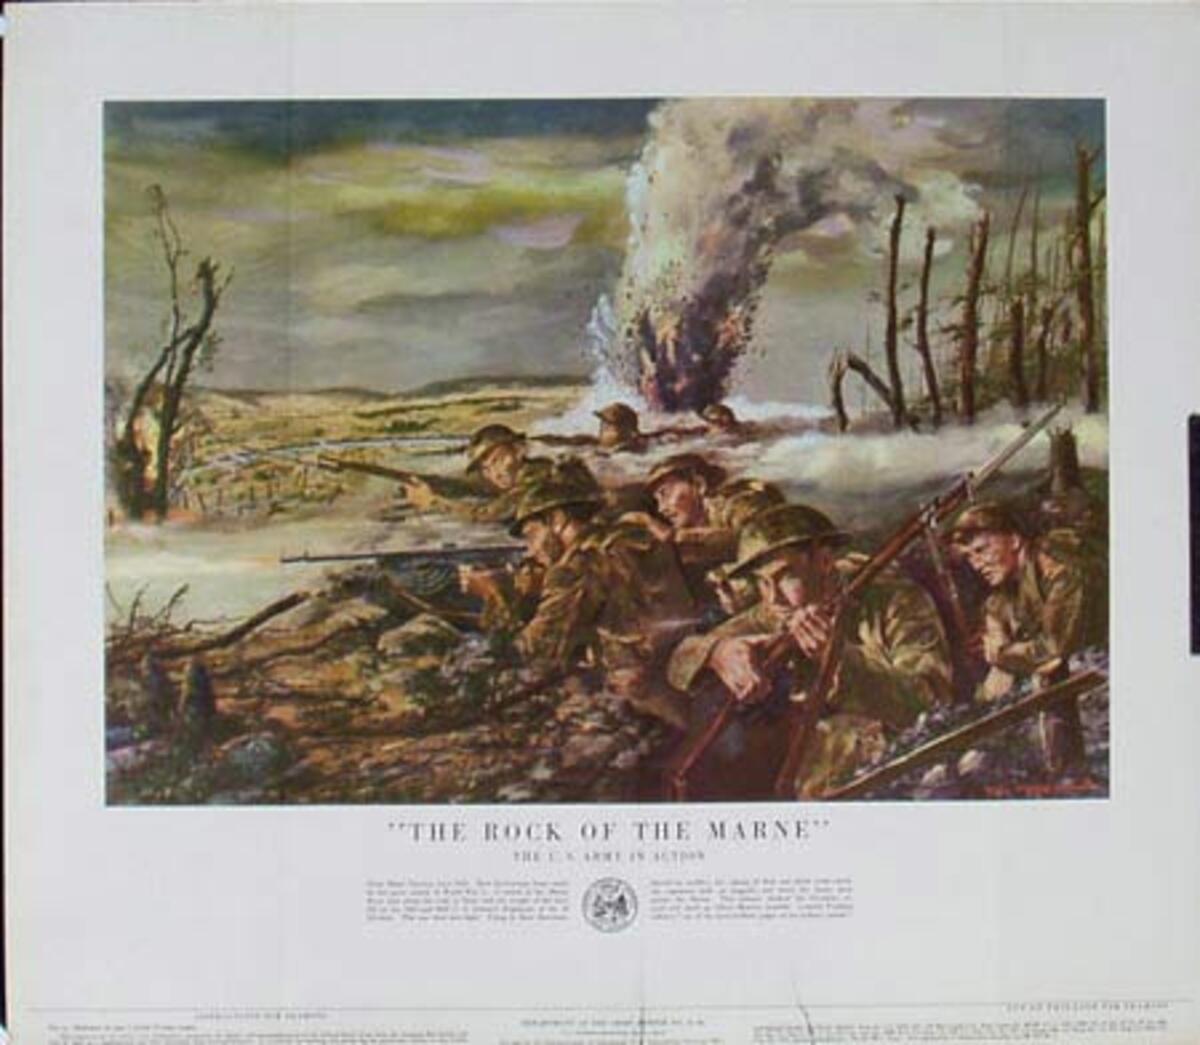 The Rock of the Marne U.S. Army in Action Original Vintage Army Propaganda Poster